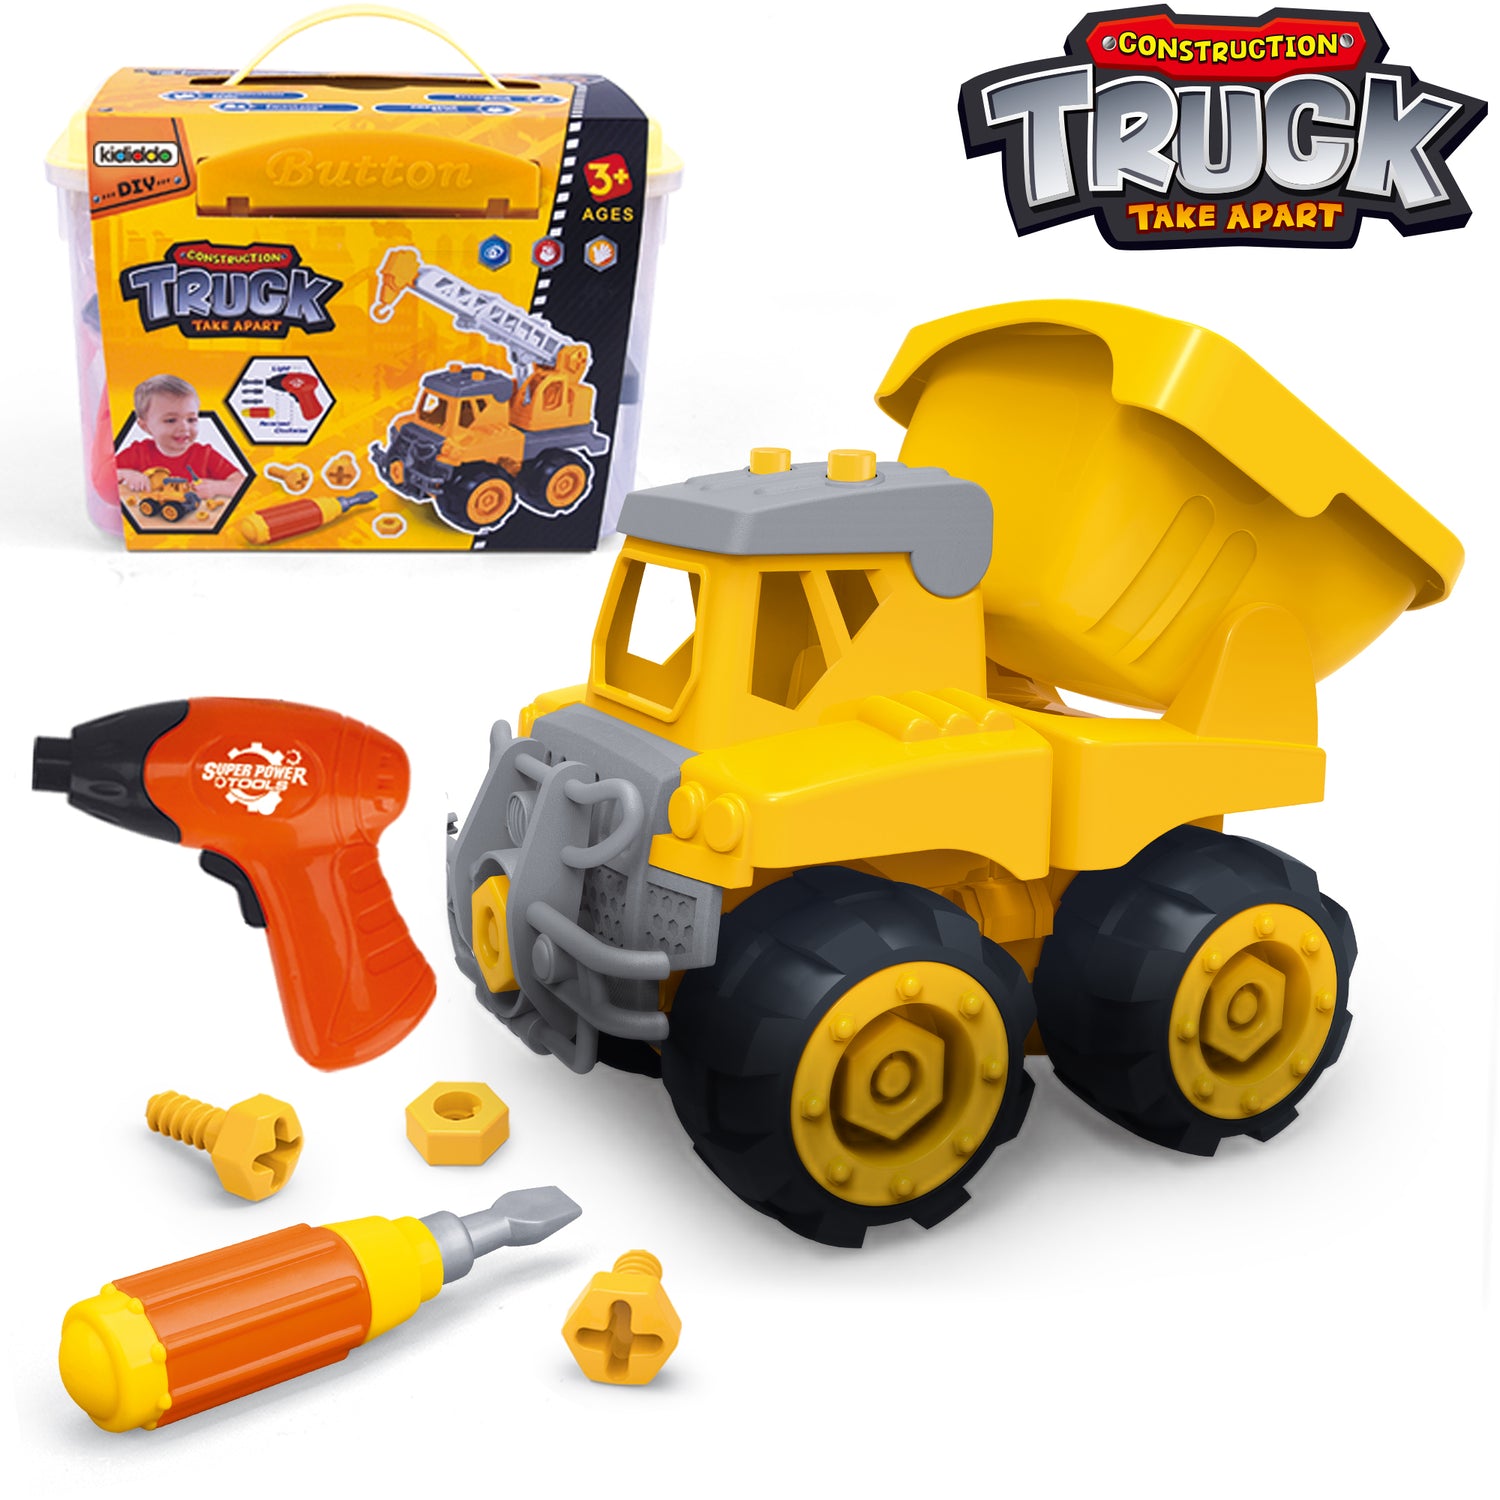 Dump Truck Take Apart Construction Toy with Drill